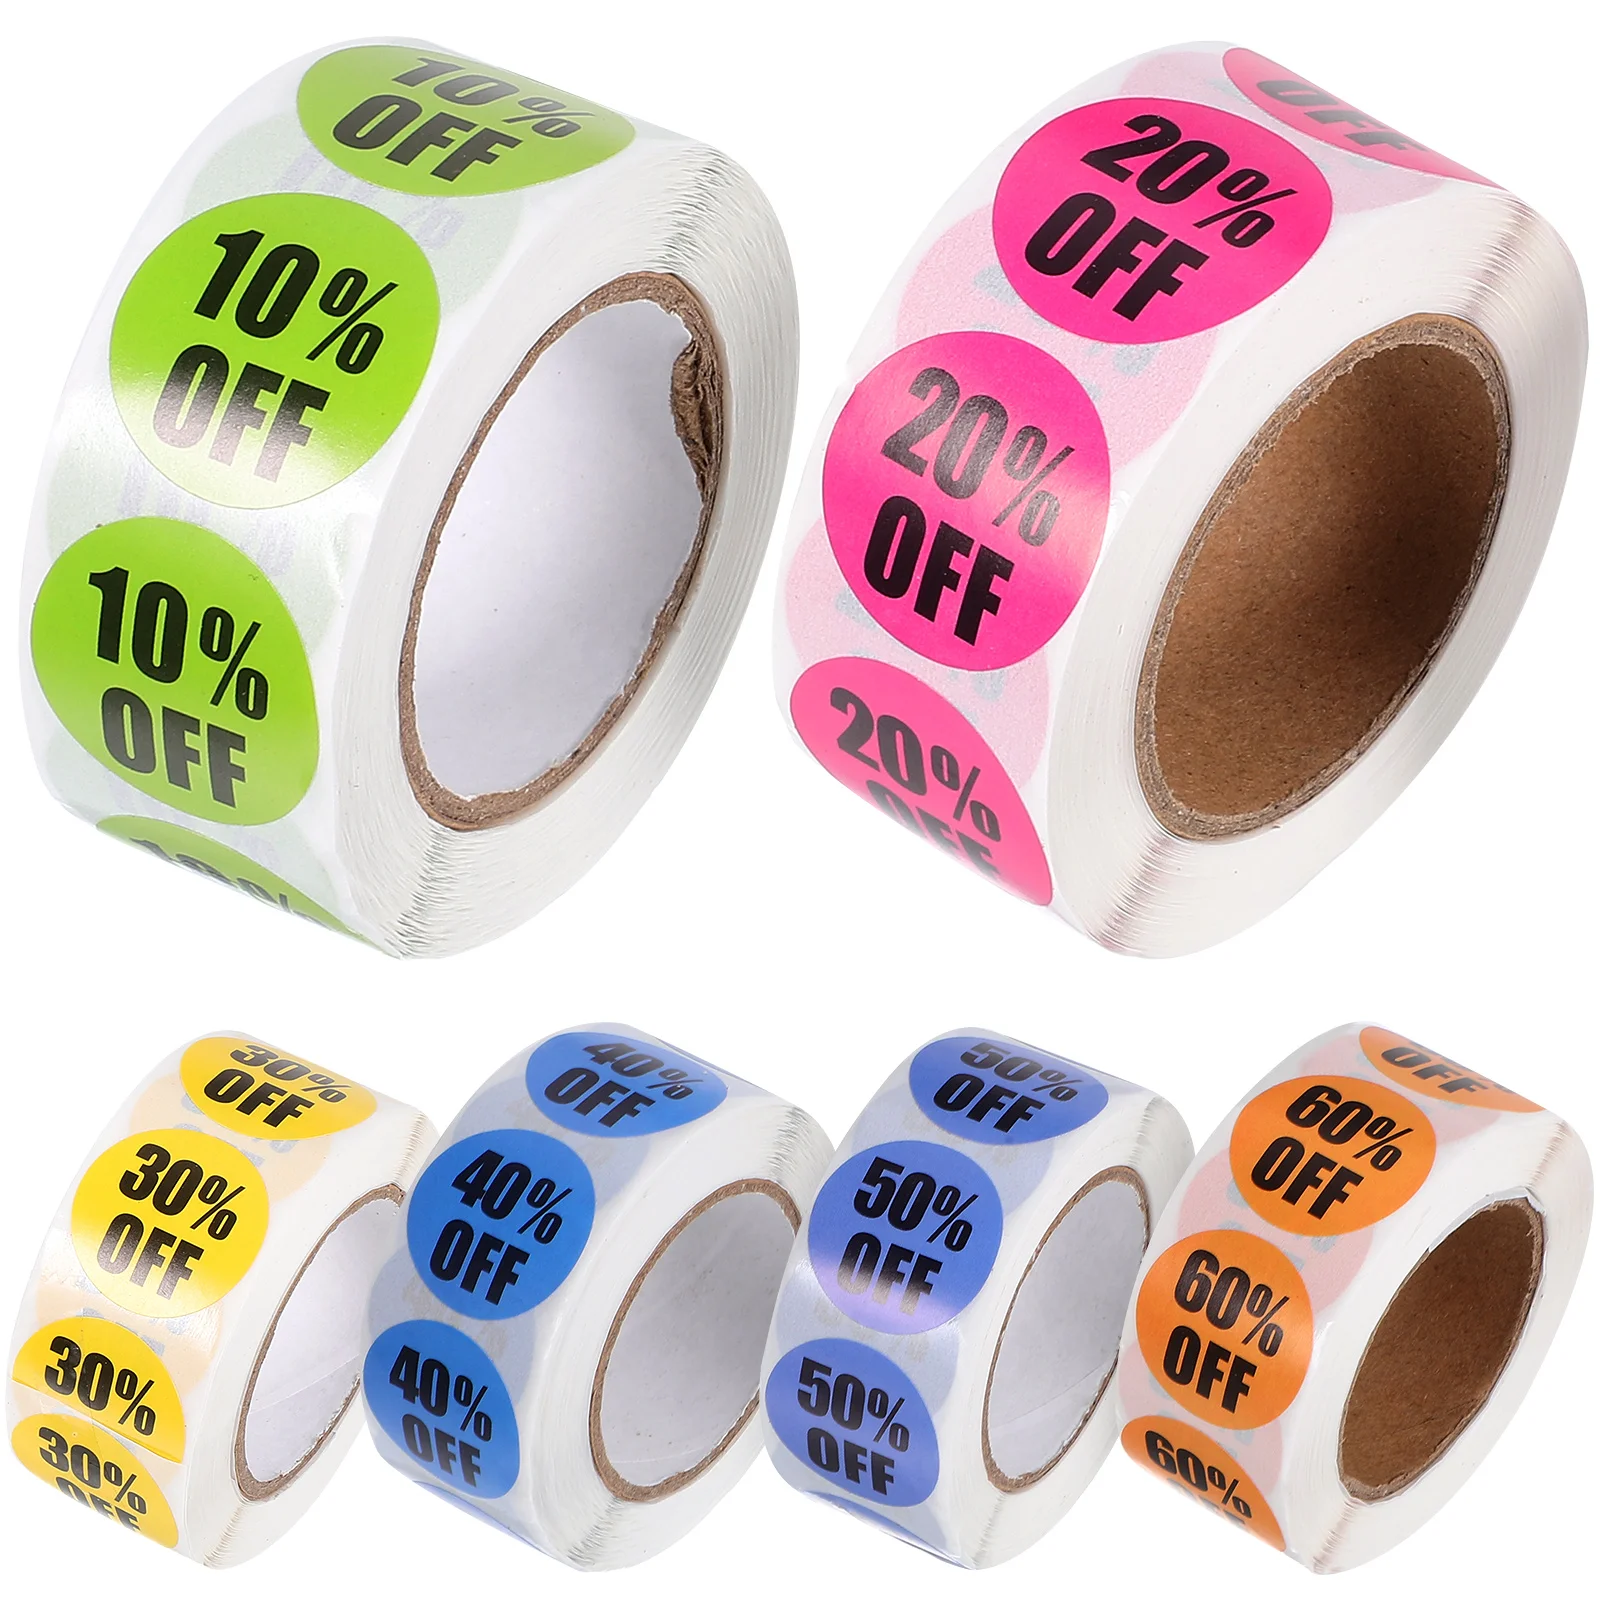 

6 Rolls Labels Discount Stickers Price for Small Business Retail Store Tags Round Circle Percent off Decals Coated Paper